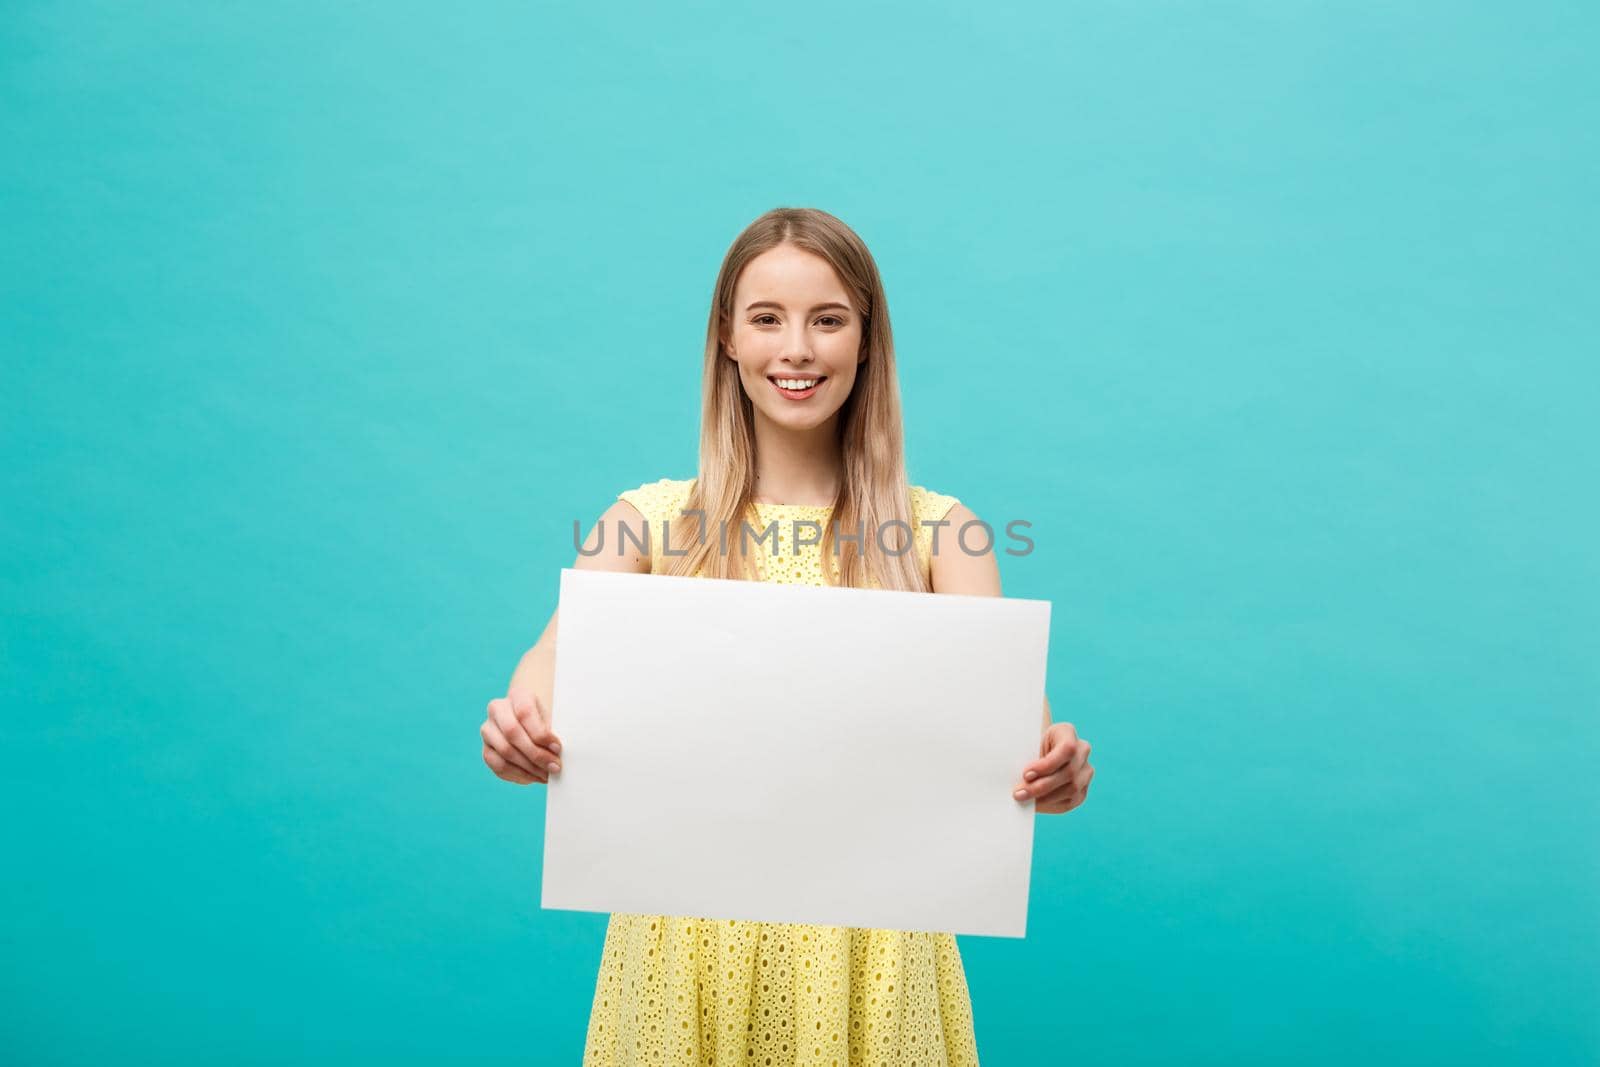 Lifestyle Concept: young beautiful girl smiling and holding a blank sheet of paper, dressed in yellow, isolated on pastel blue background.